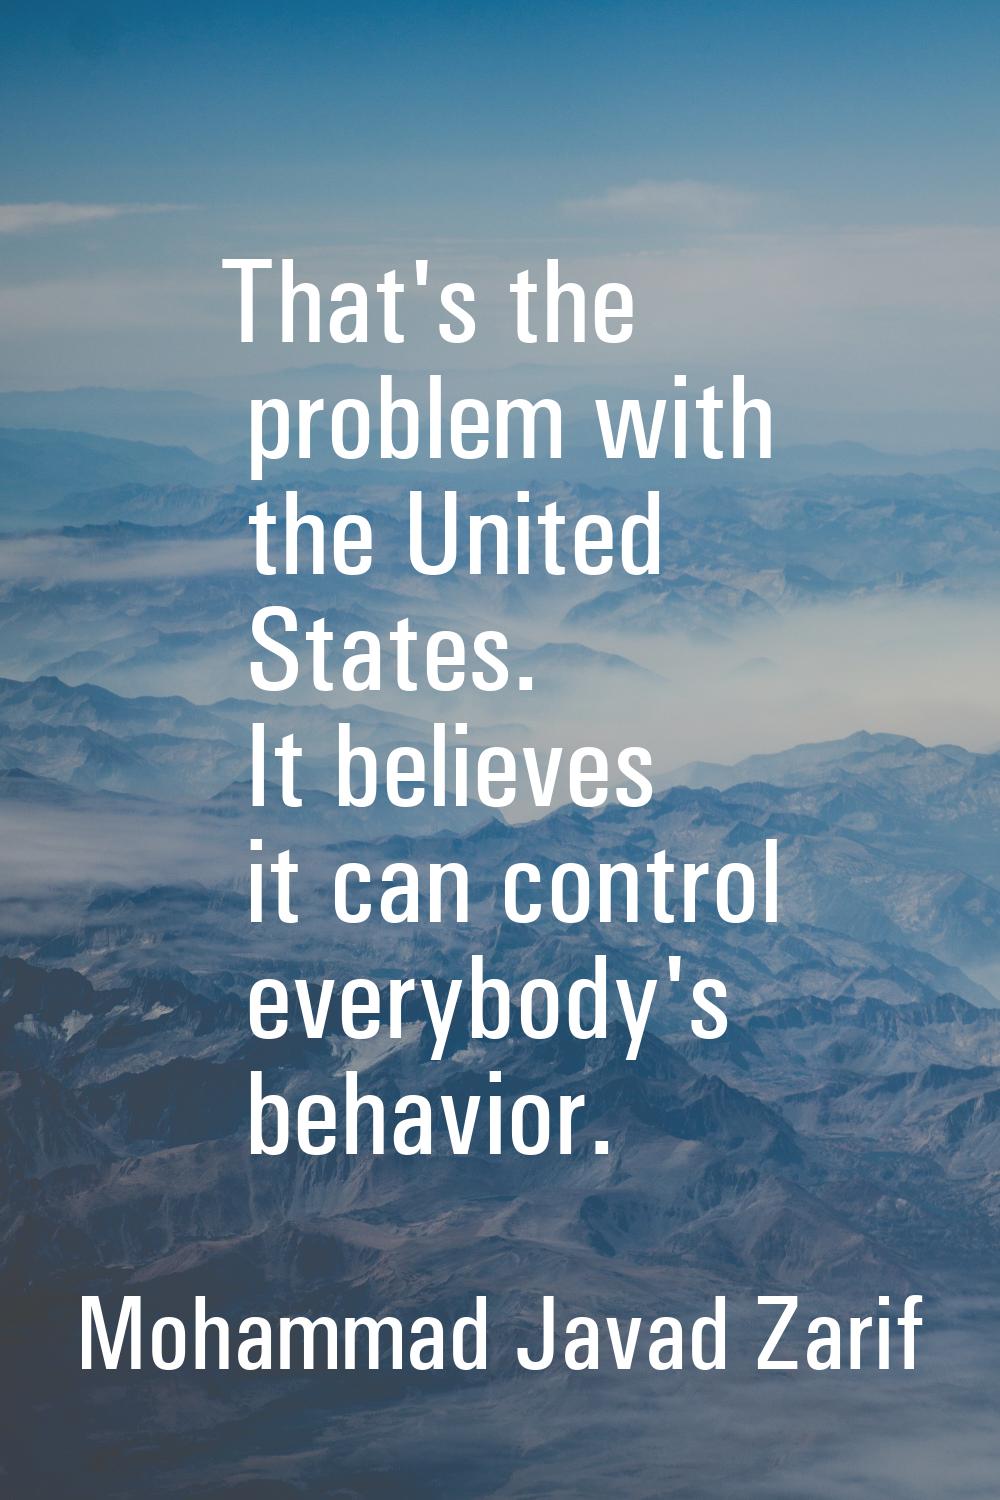 That's the problem with the United States. It believes it can control everybody's behavior.